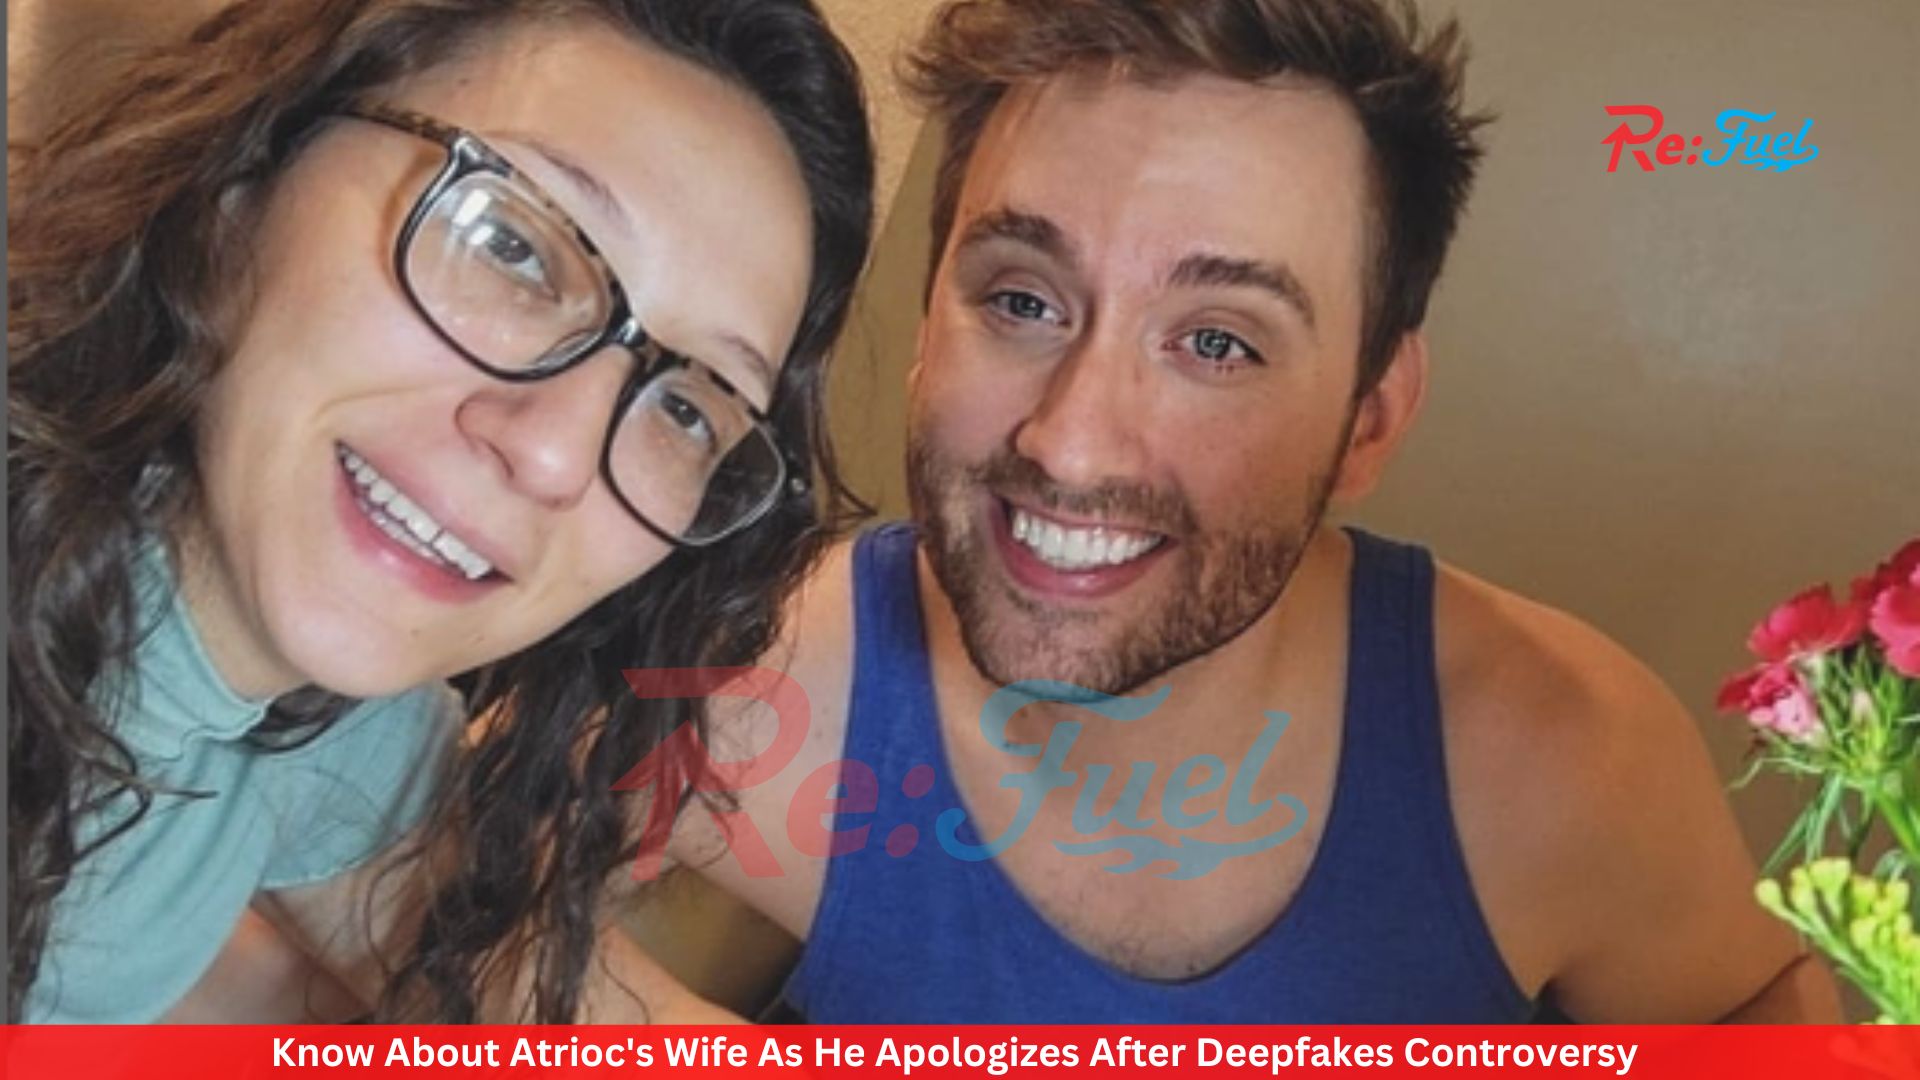 Know About Atrioc's Wife As He Apologizes After Deepfakes Controversy